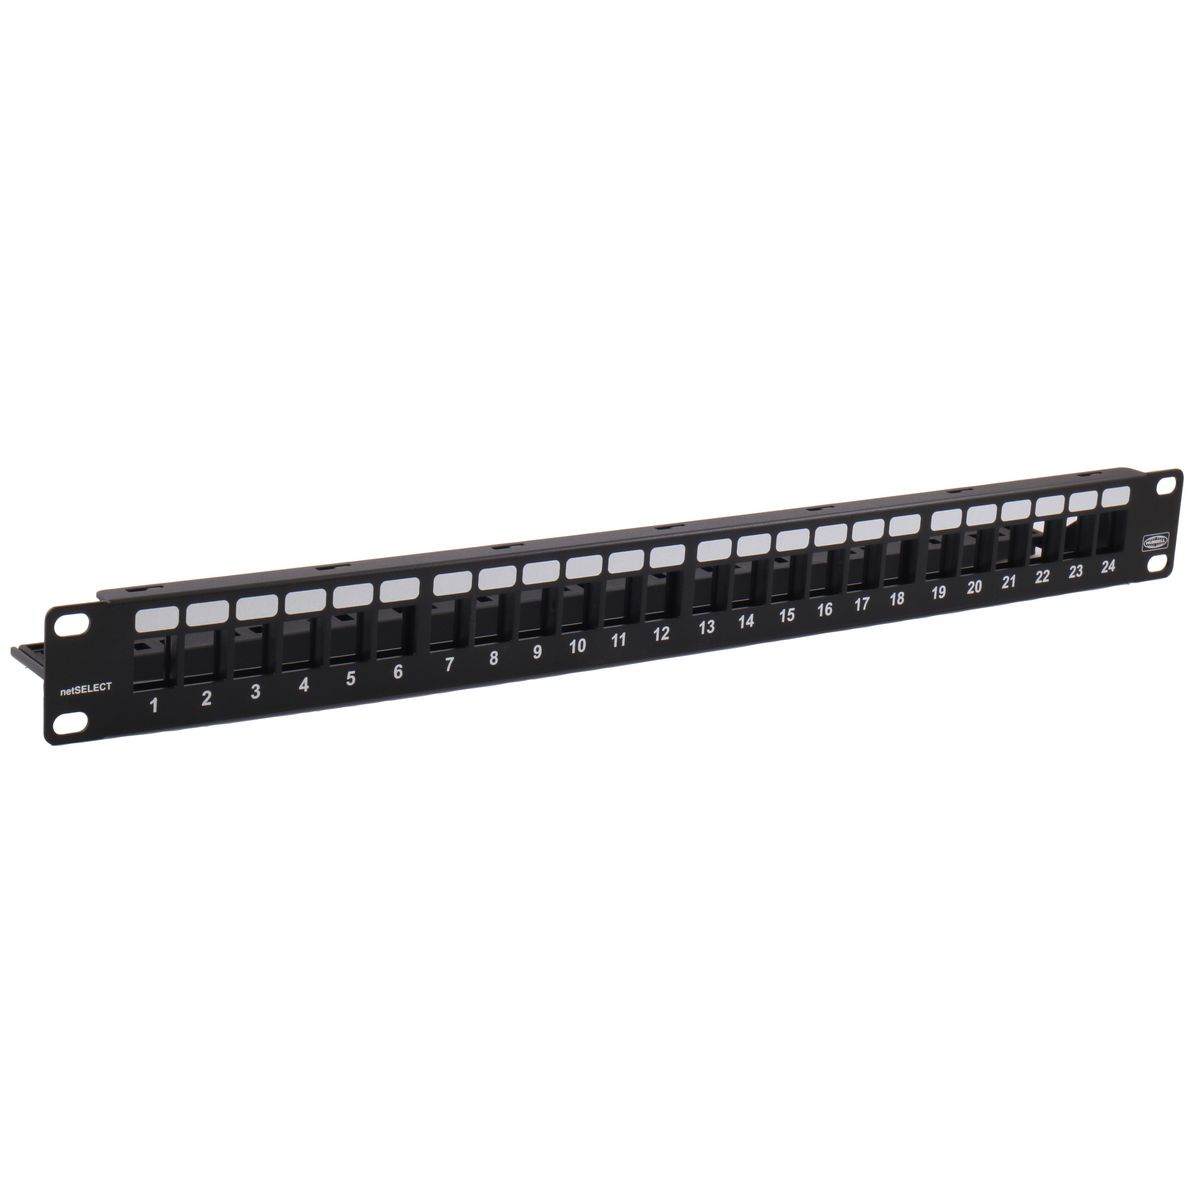 Hubbell Premise Wiring Products, Copper Solutions, Patch Panel,Unloaded, NetSelect, 24-Pair, 19" Width X 1.75" Height